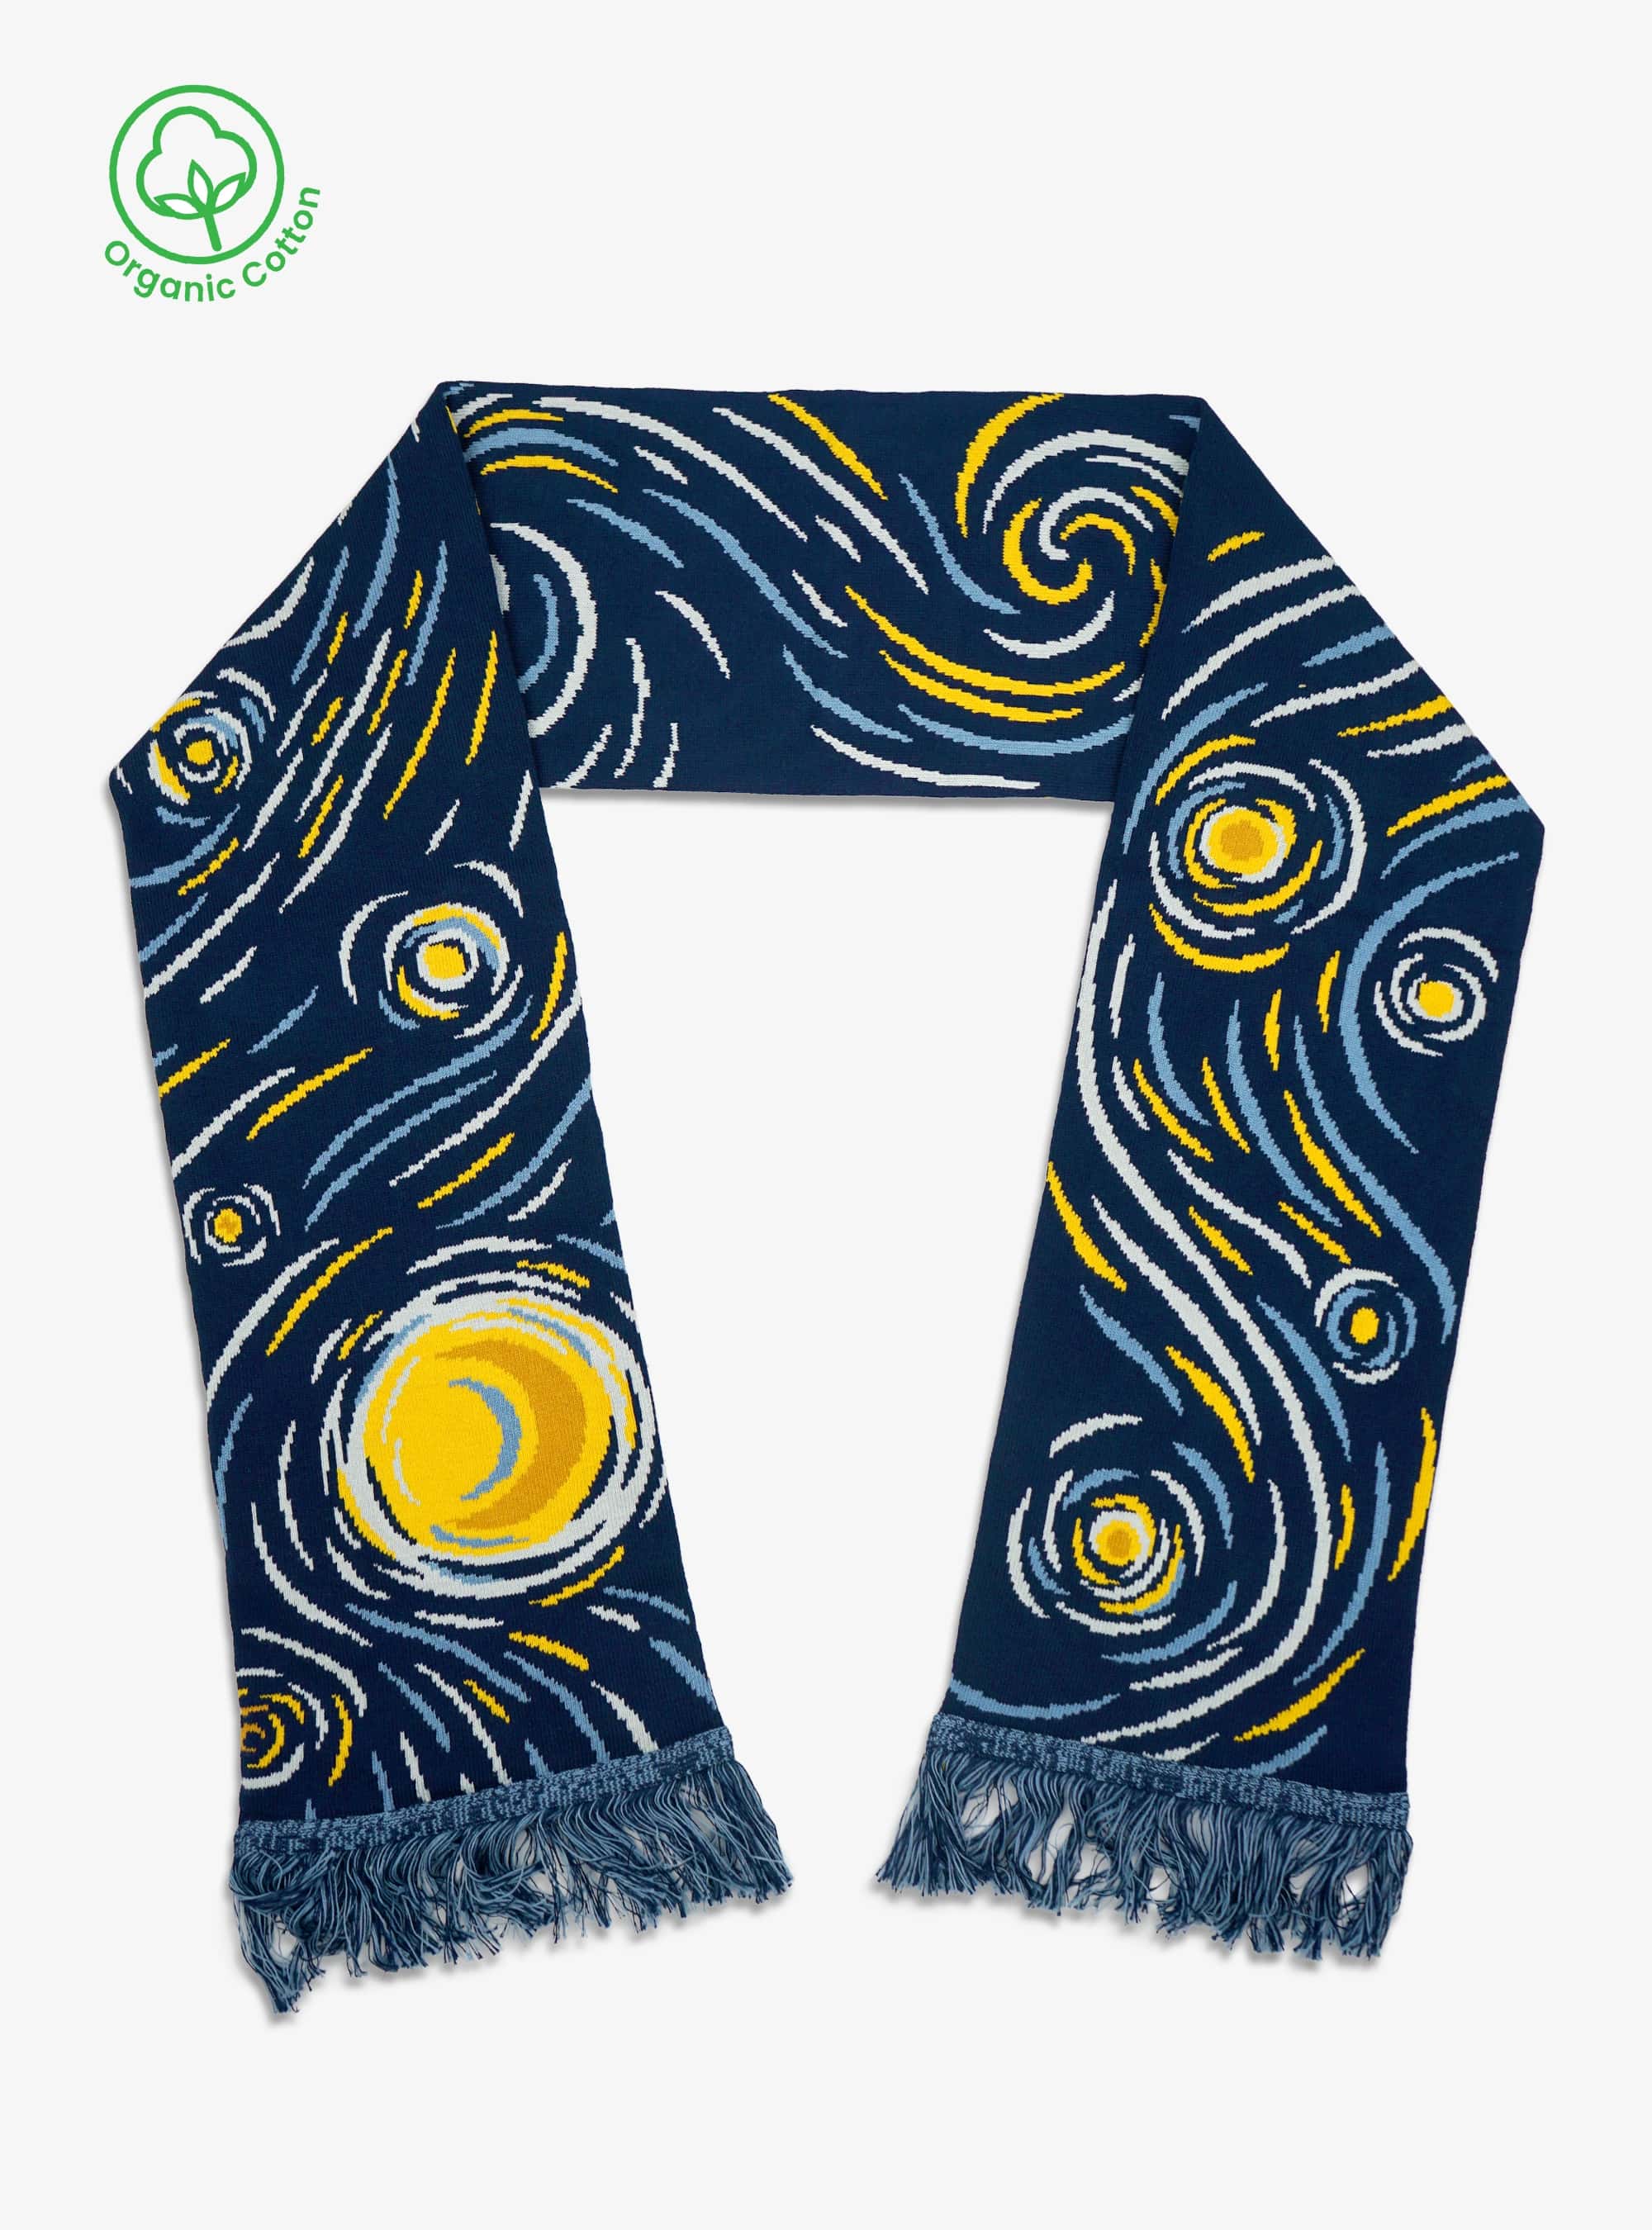 The Starry Night Scarf